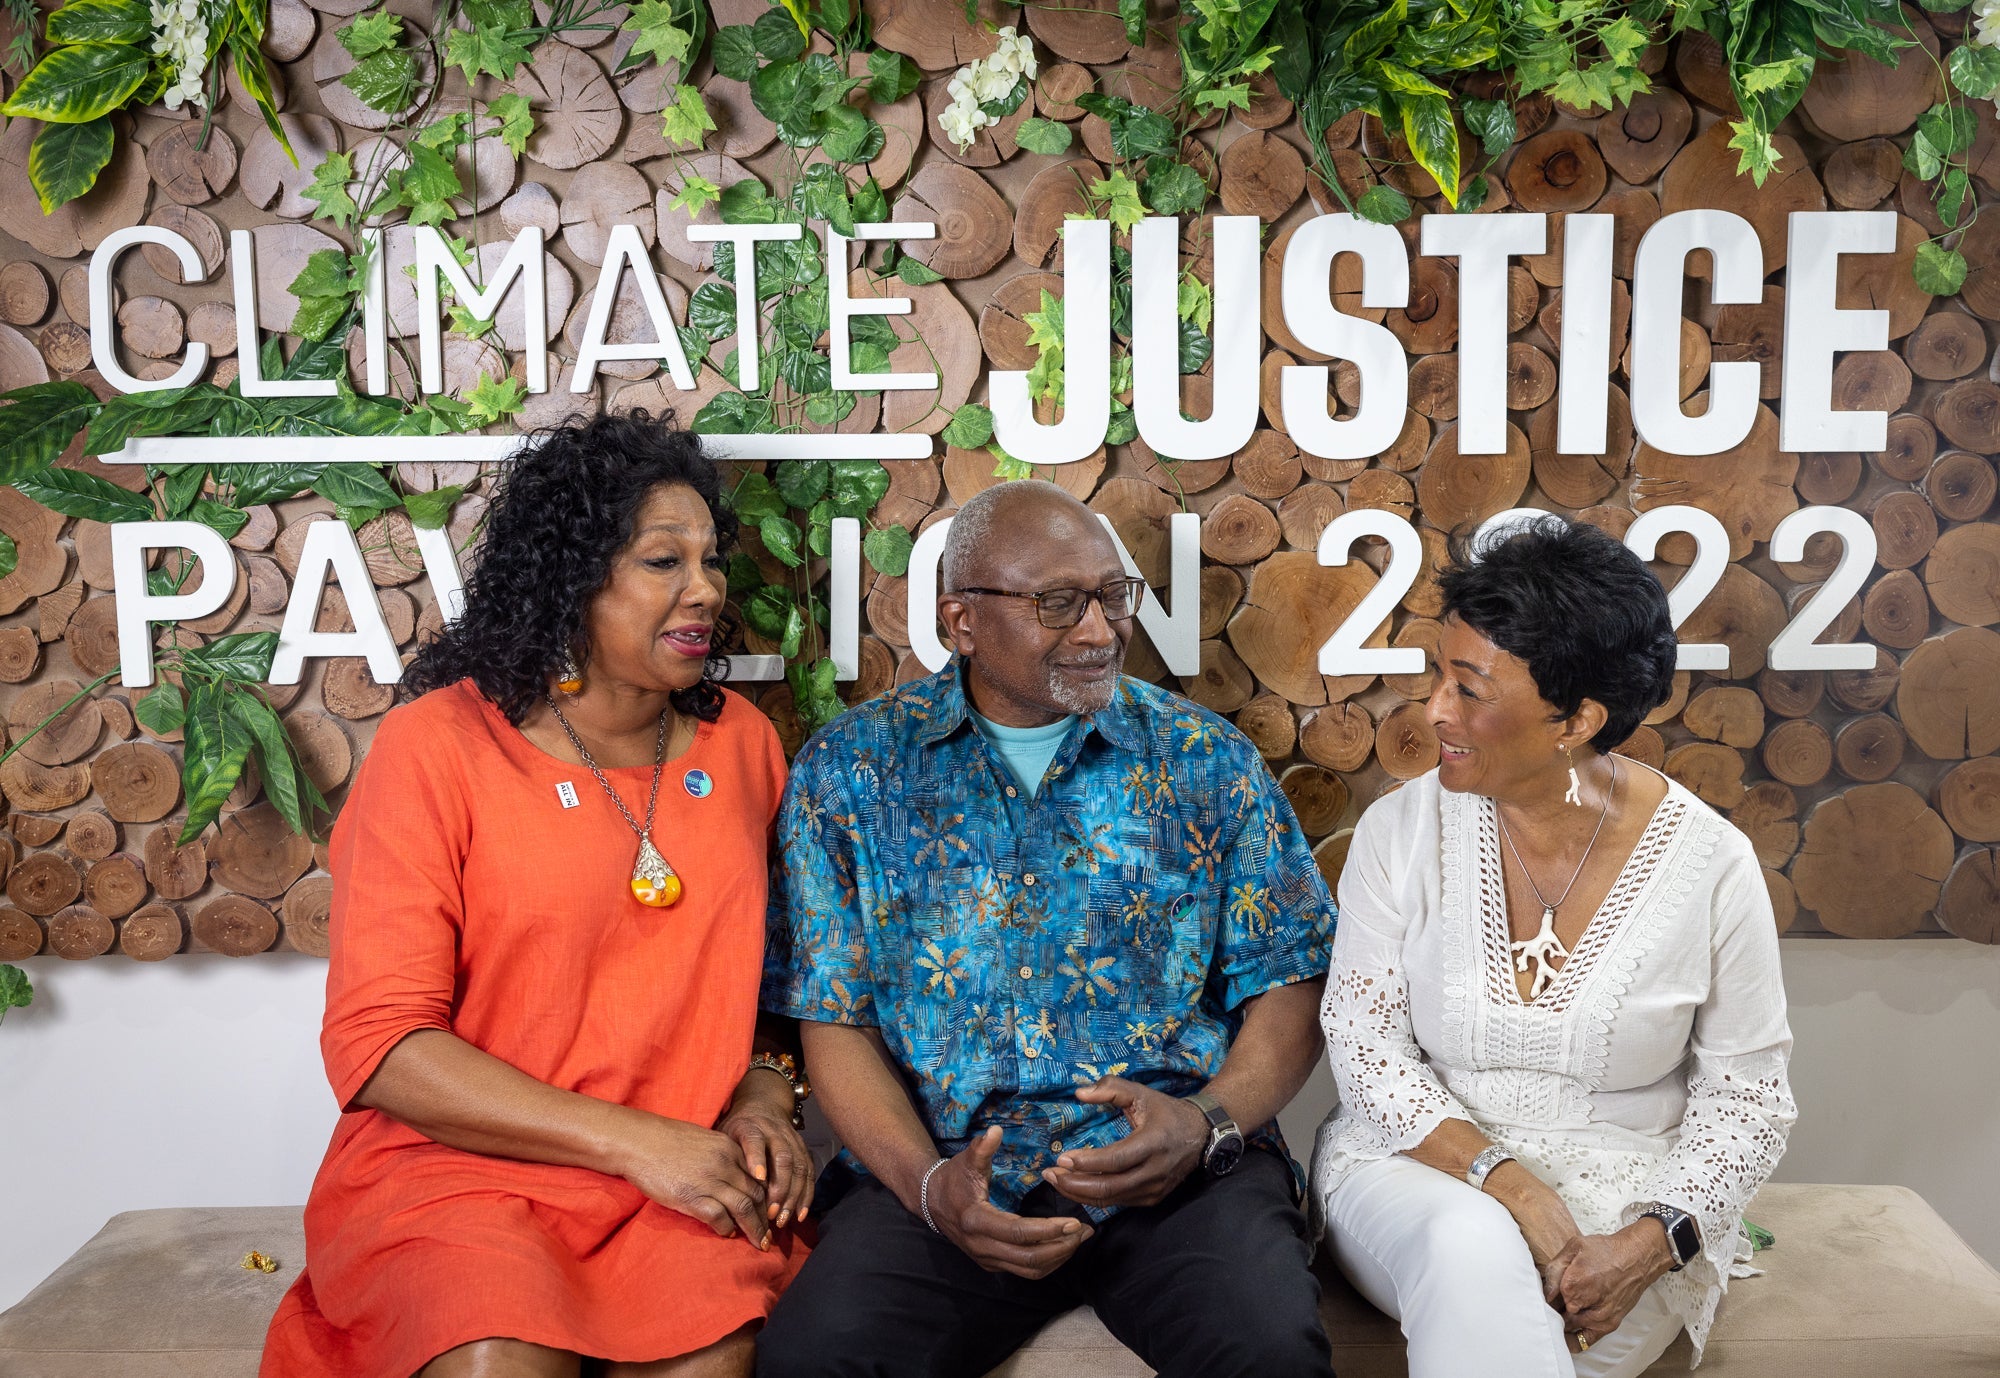 The founders and leaders of the organizations that created the Climate Justice Pavilion, from left: Dr. Beverly Wright of the Deep South Center for Environmental Justice, Dr. Robert Bullard of the Bullard Center for Environmental Justice, and Peggy Shepar